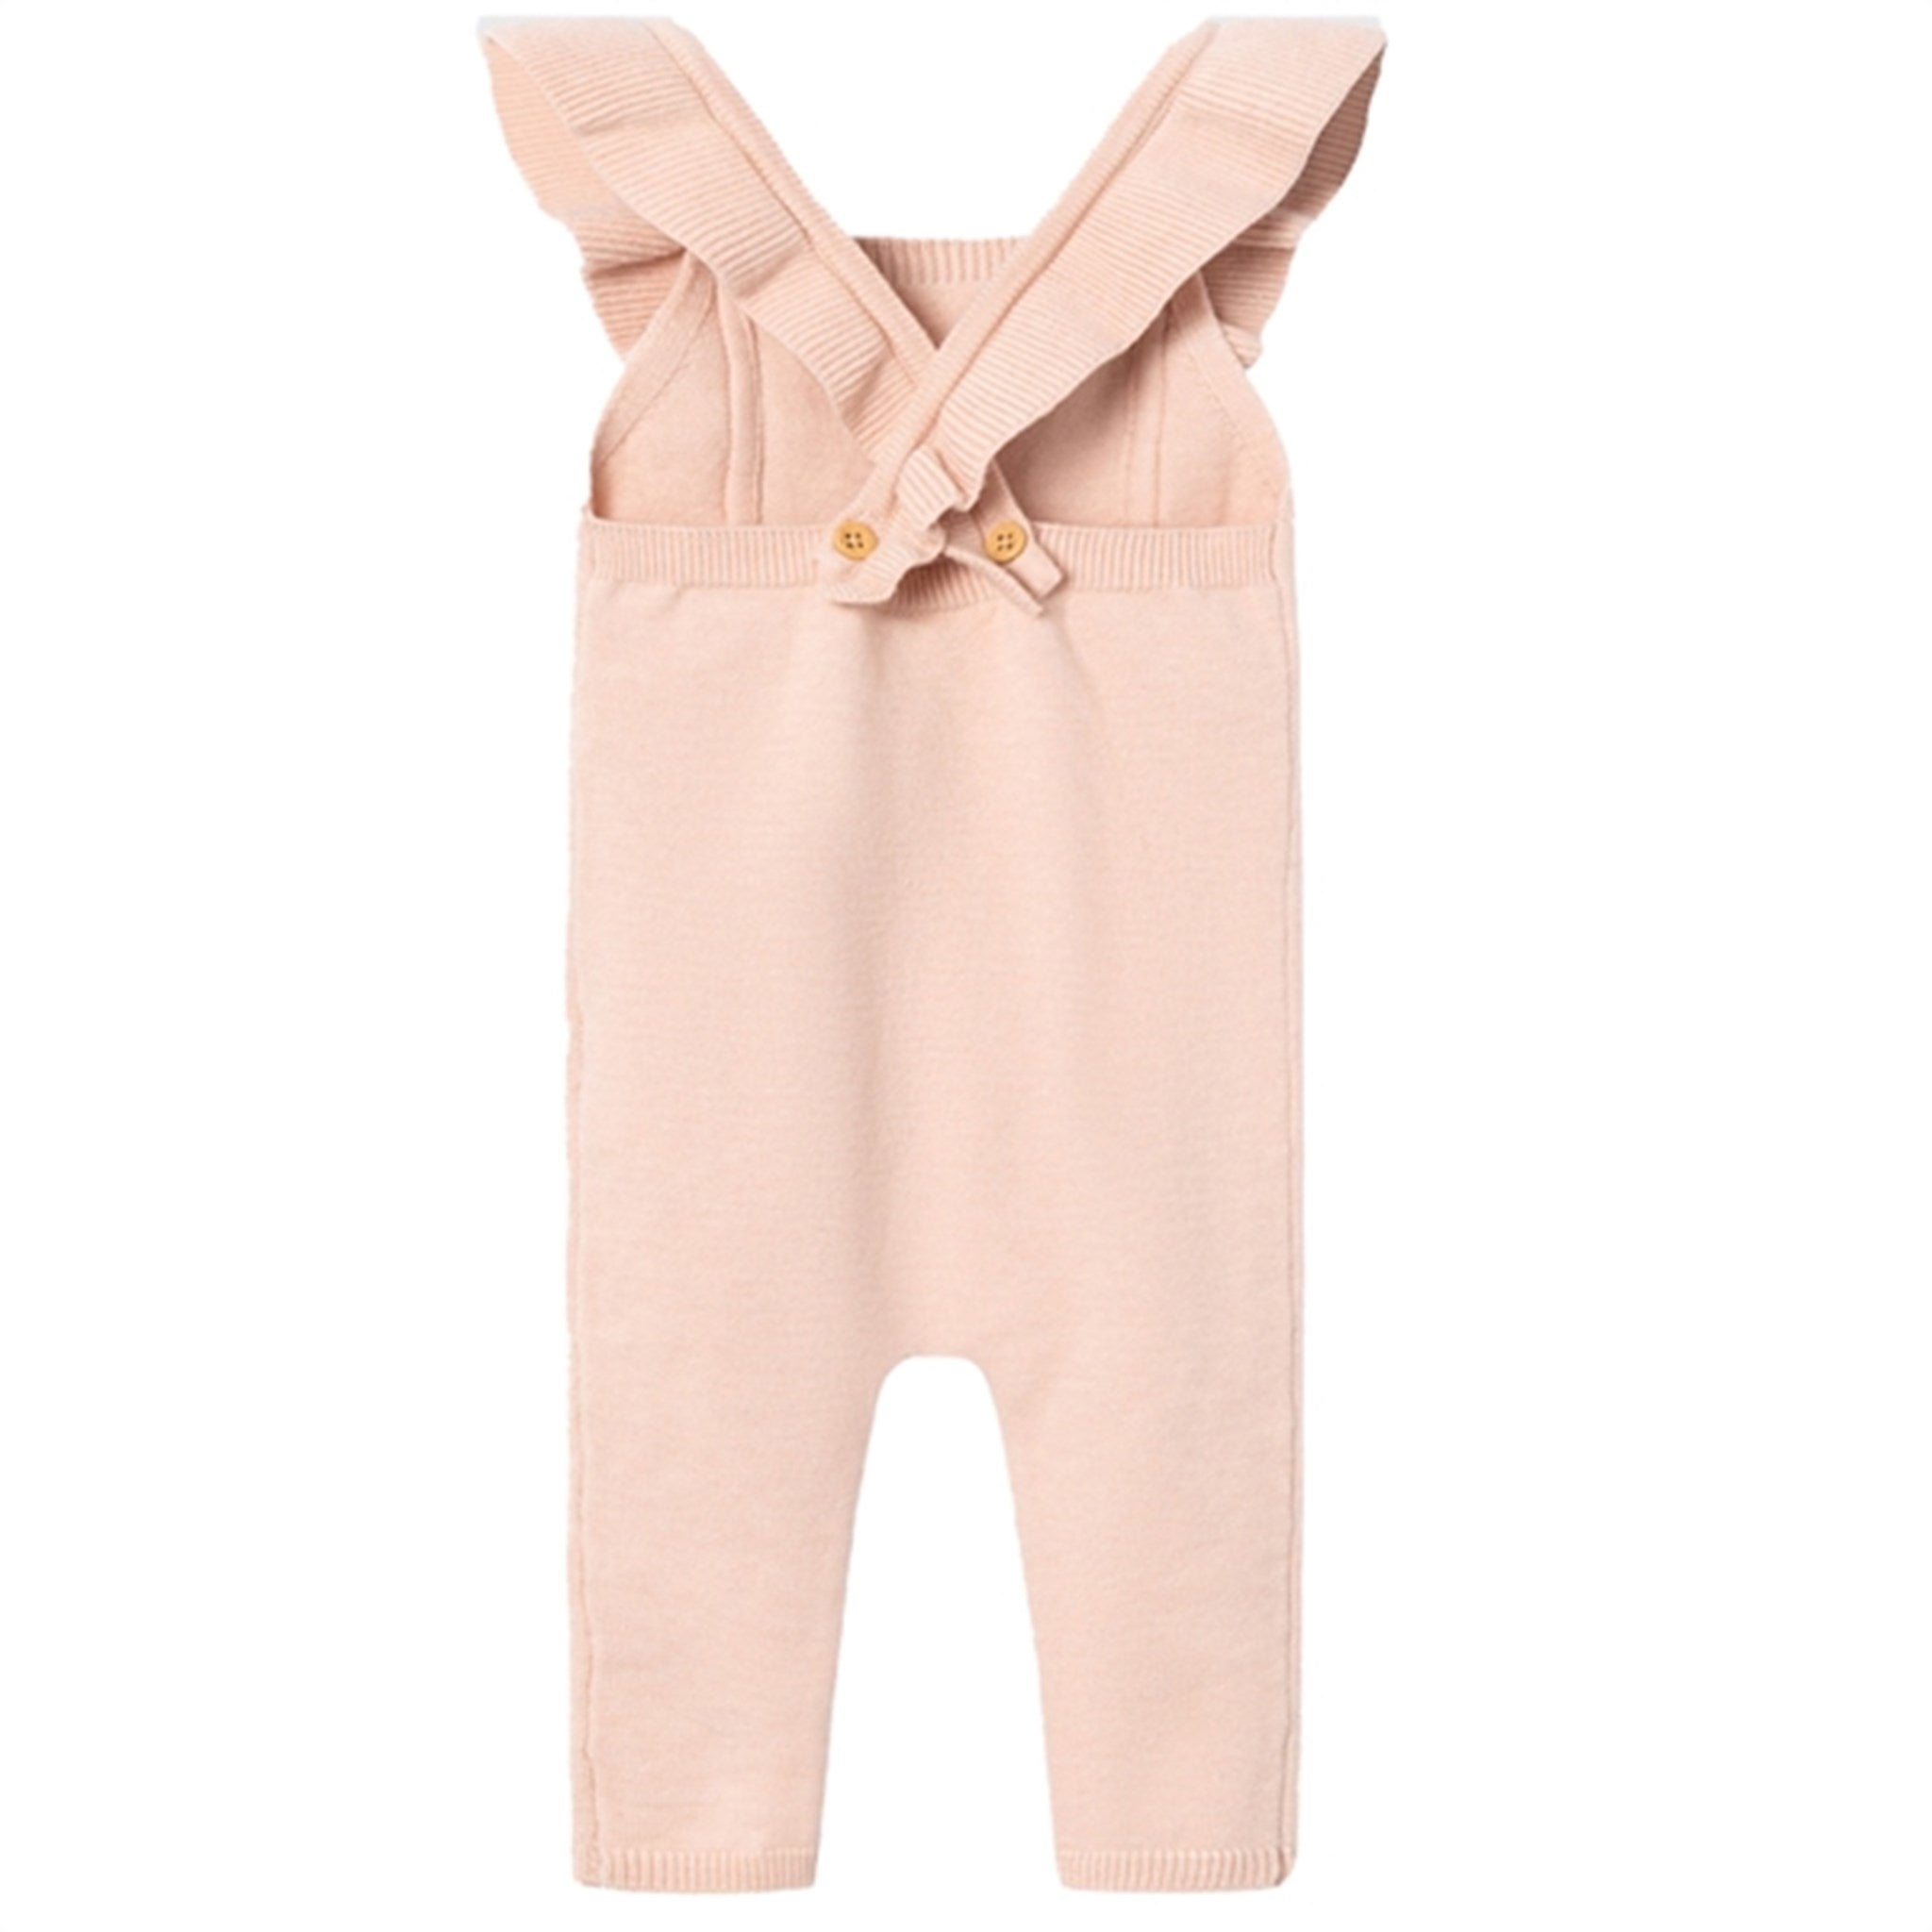 Name it Rose Smoke Remille Knit Overall 3